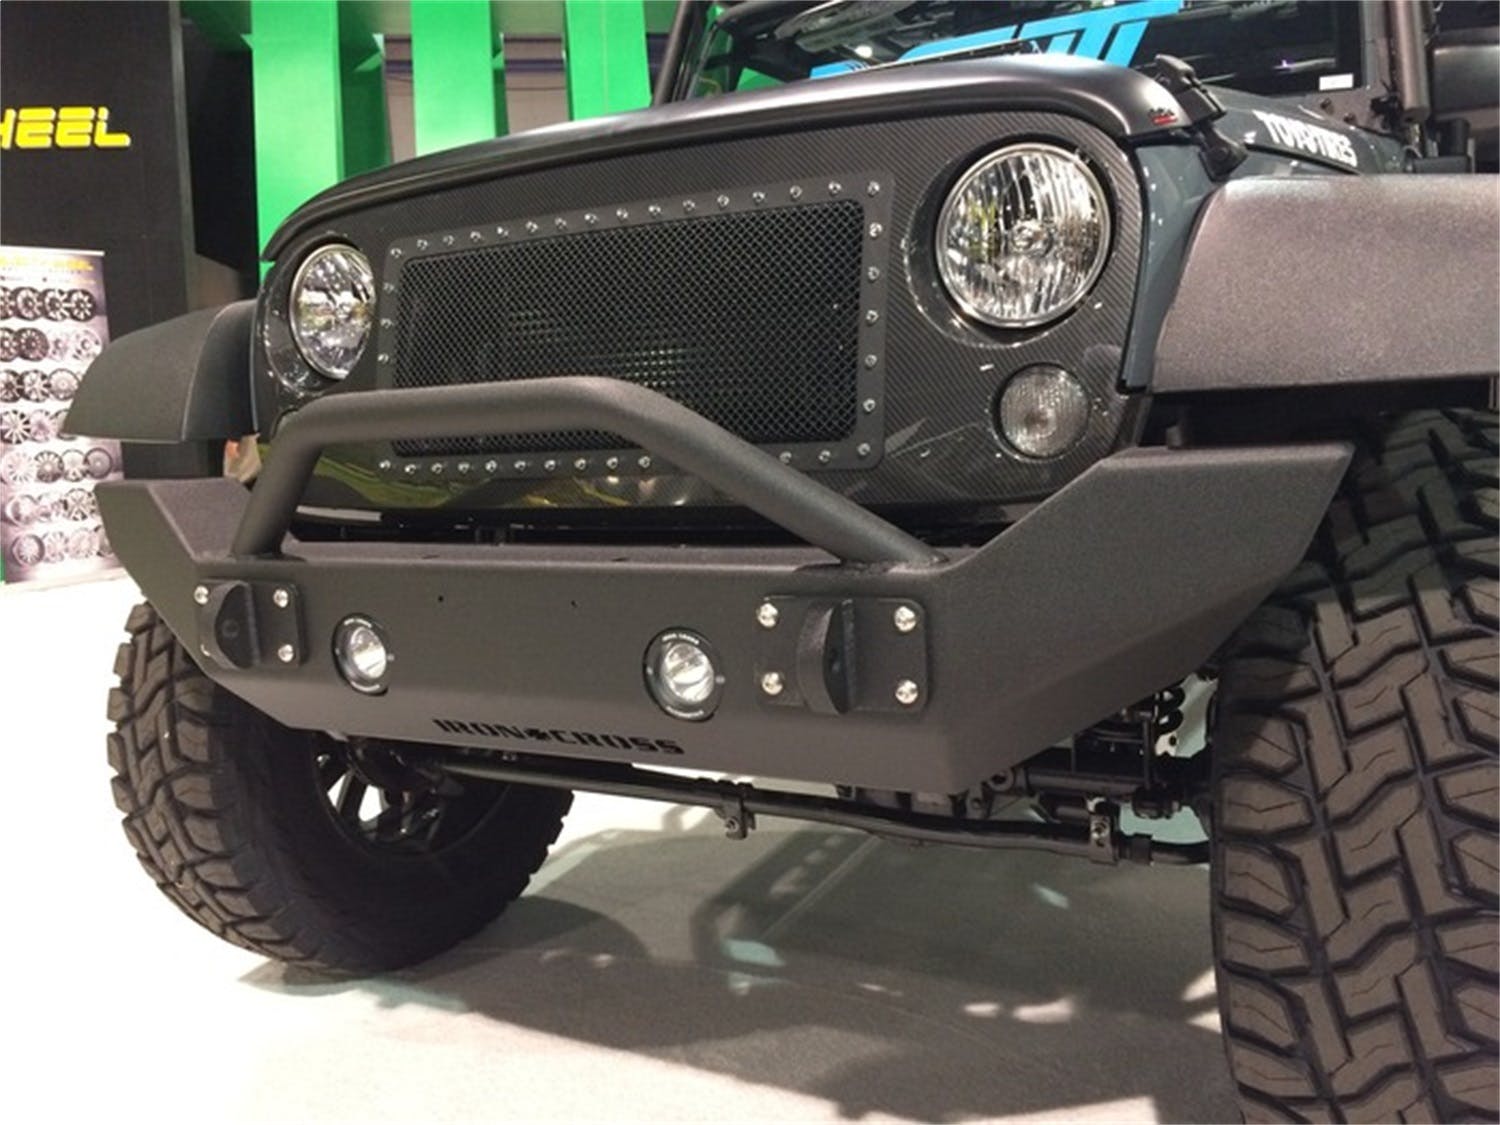 Iron Cross Automotive GP-1302 Full Size front bumper with Bar